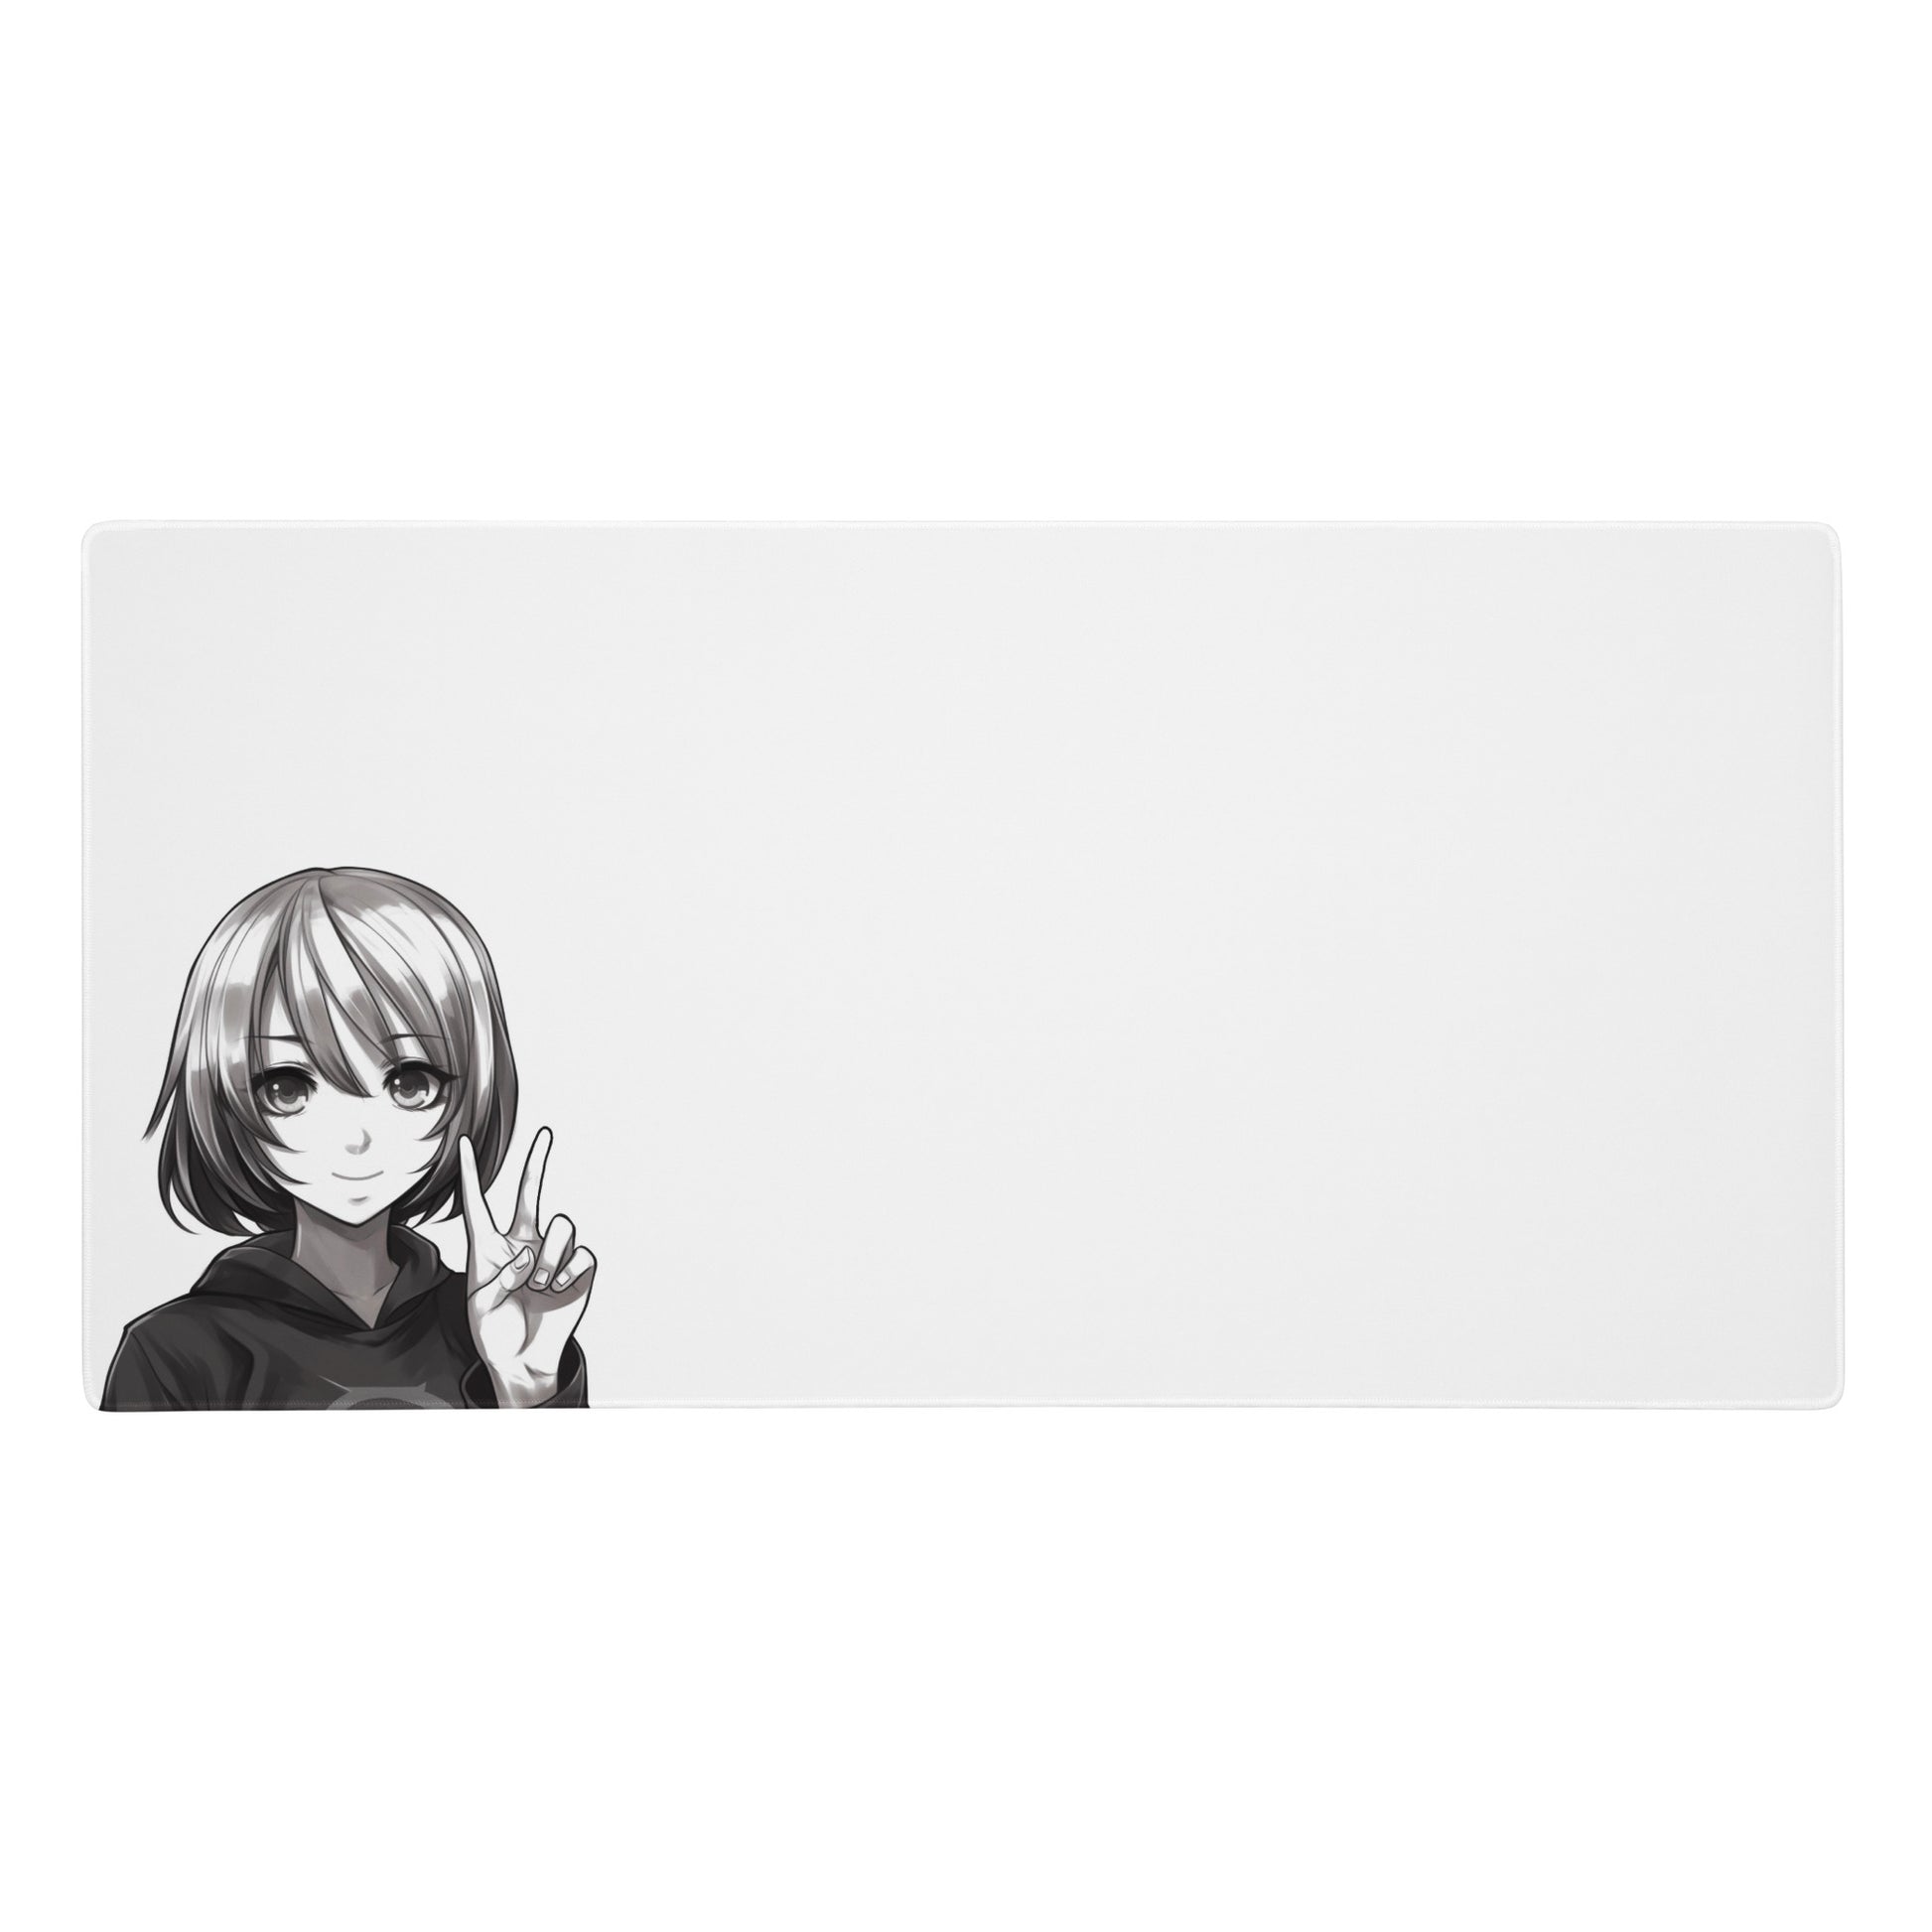 A 36" x 18" black and white desk pad with an anime girl making a peace sign.